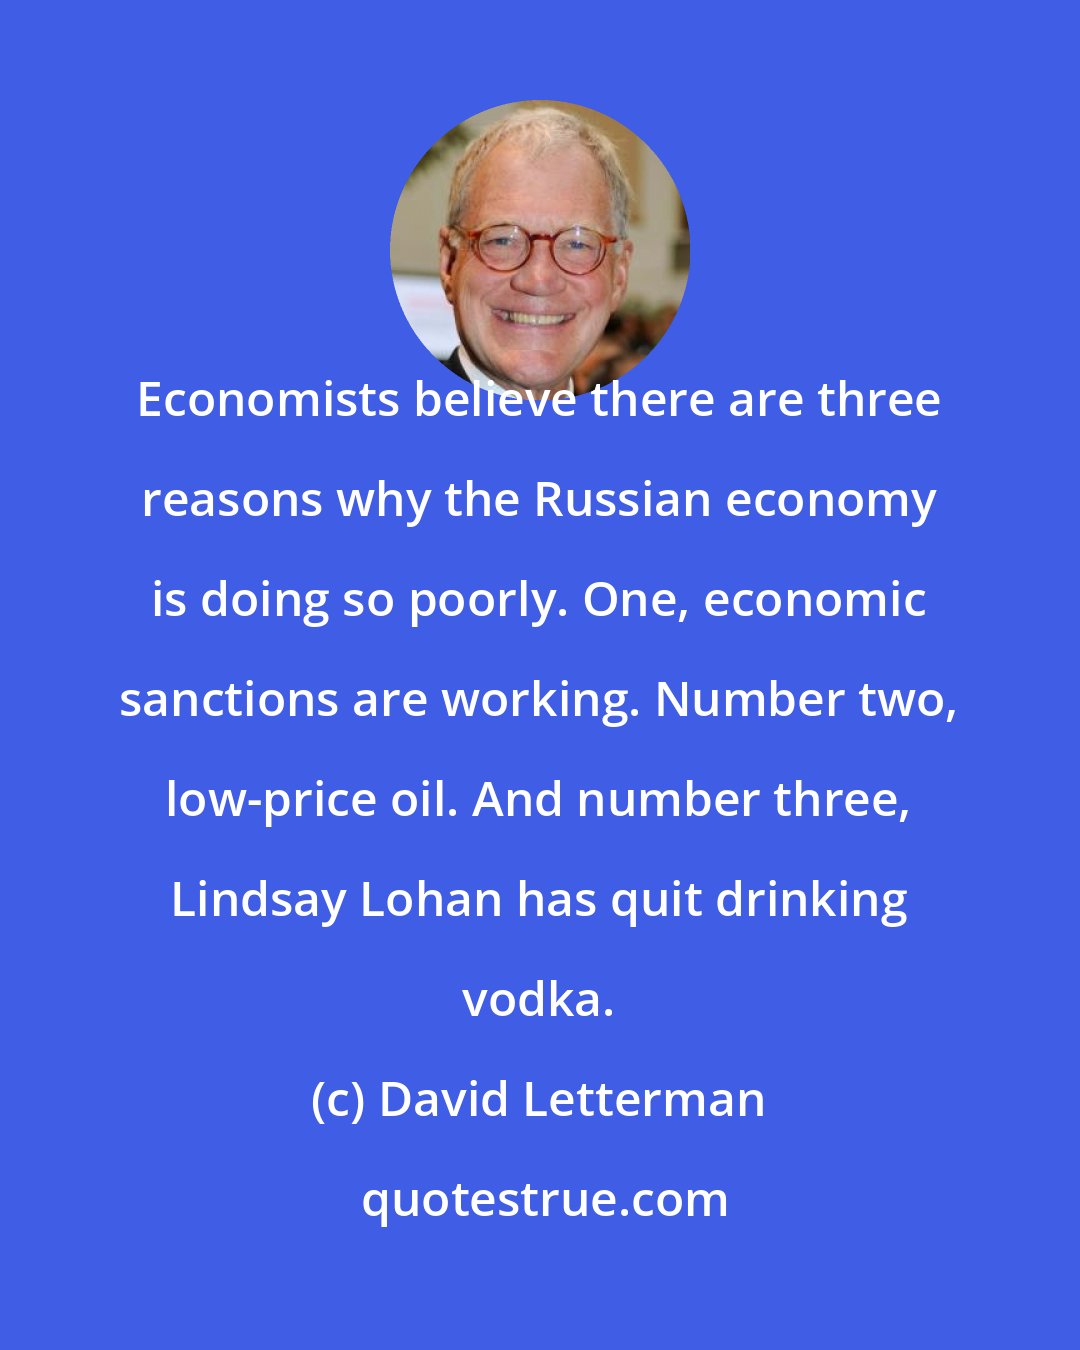 David Letterman: Economists believe there are three reasons why the Russian economy is doing so poorly. One, economic sanctions are working. Number two, low-price oil. And number three, Lindsay Lohan has quit drinking vodka.